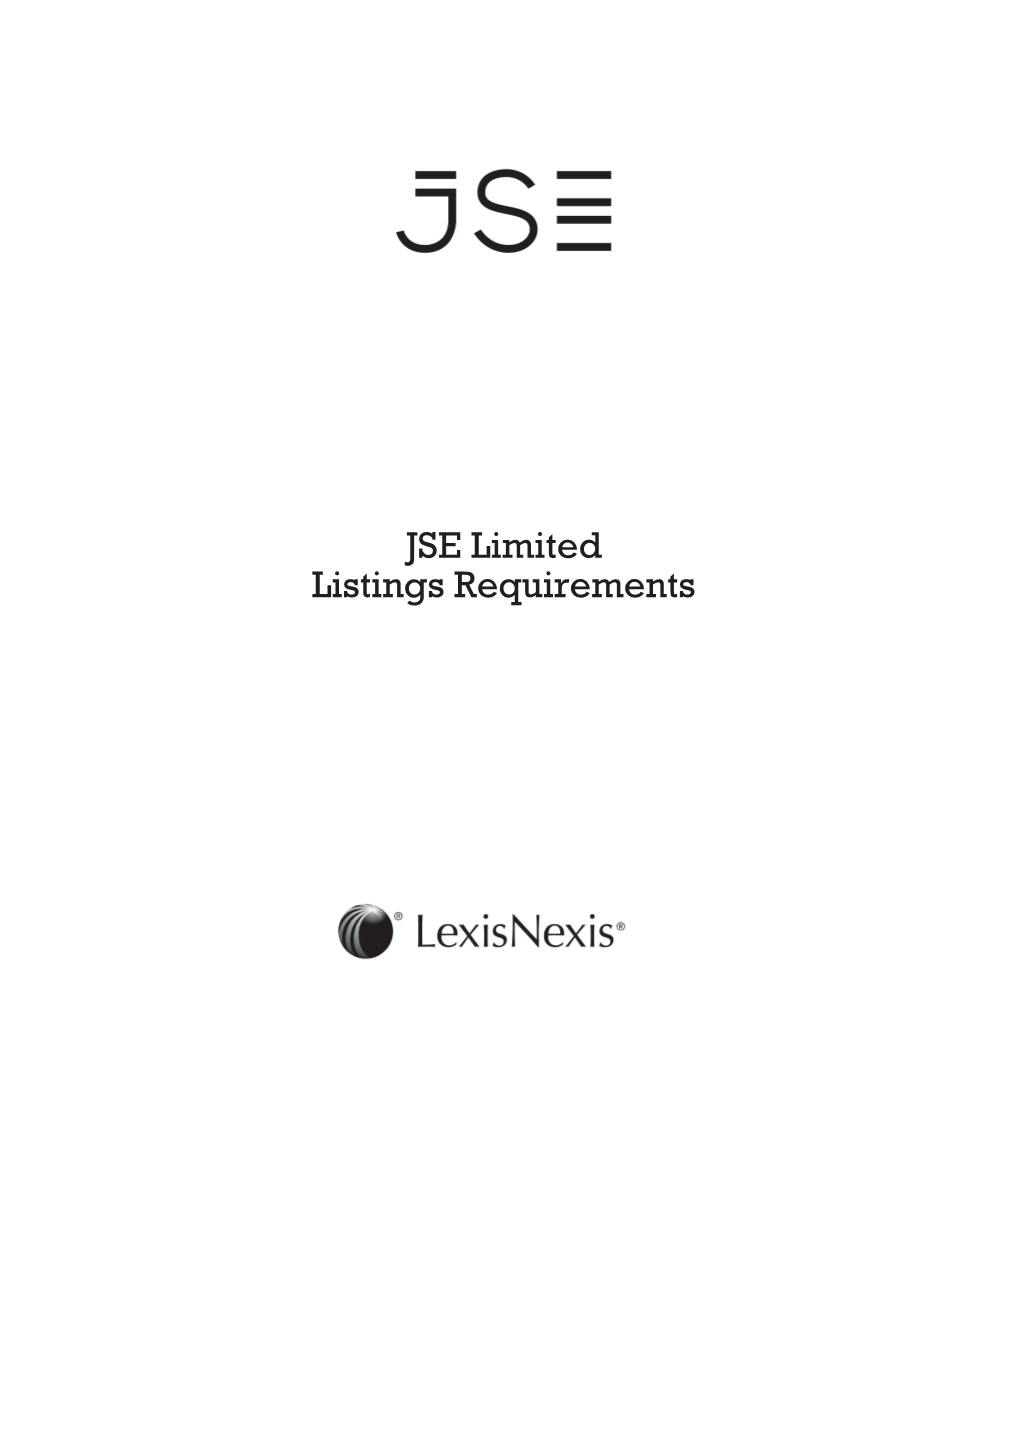 JSE Limited Listings Requirements